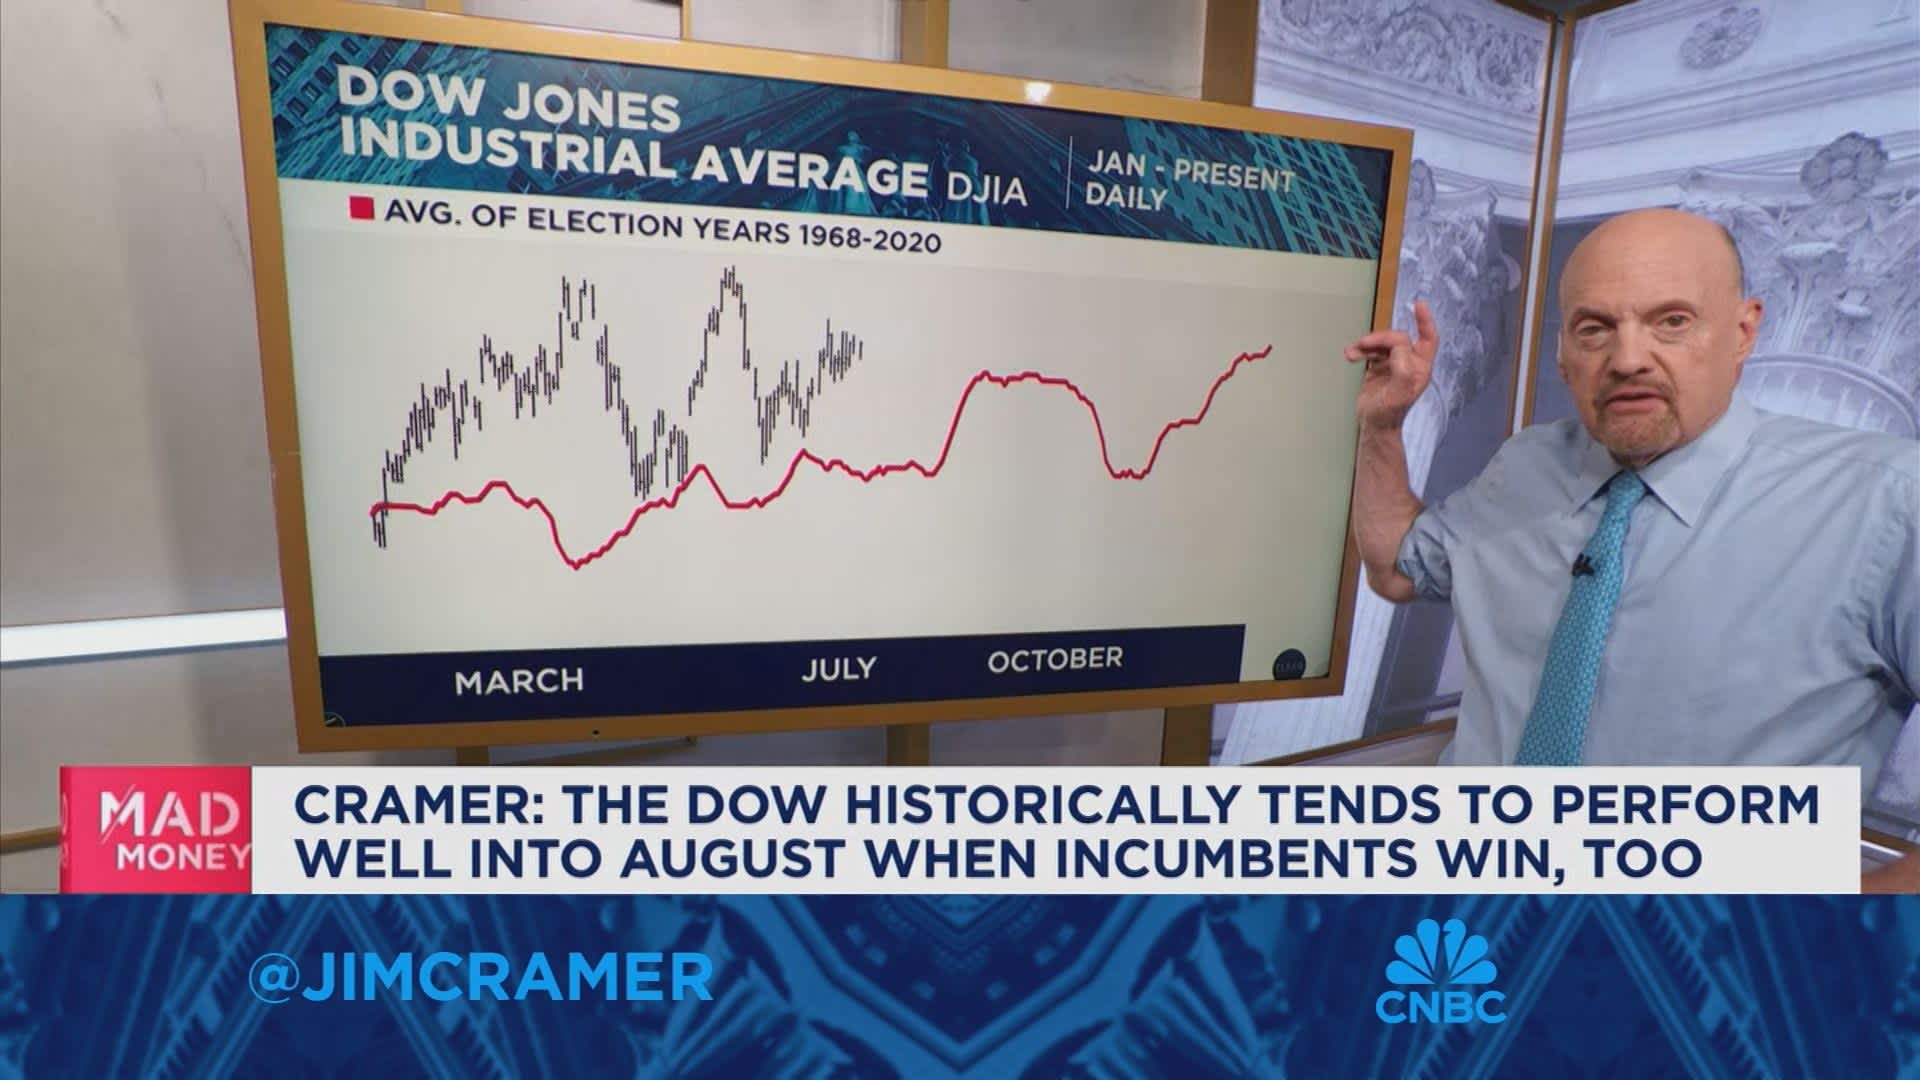 The Dow historically performs well in August when incumbents win, says Jim Cramer